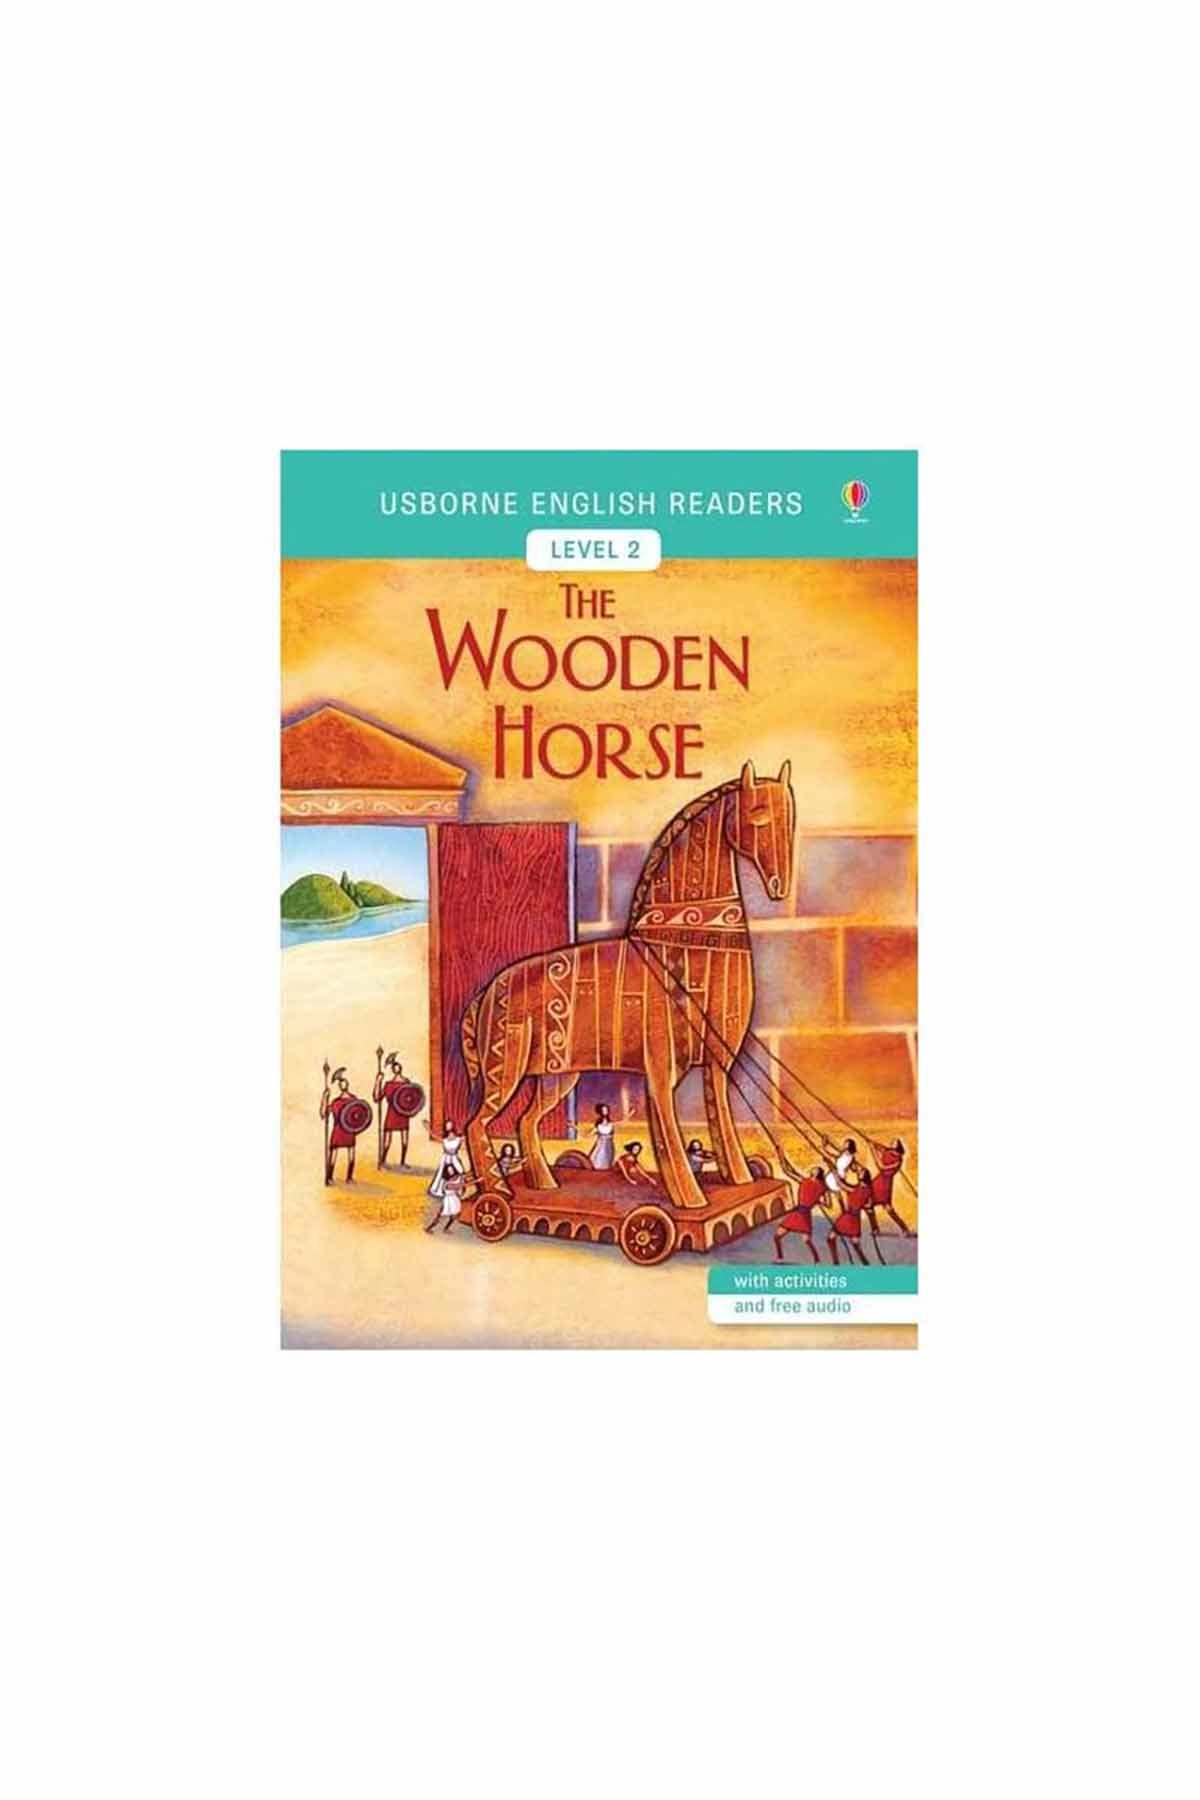 The Usborne The Wooden Horse English Readers Level 2